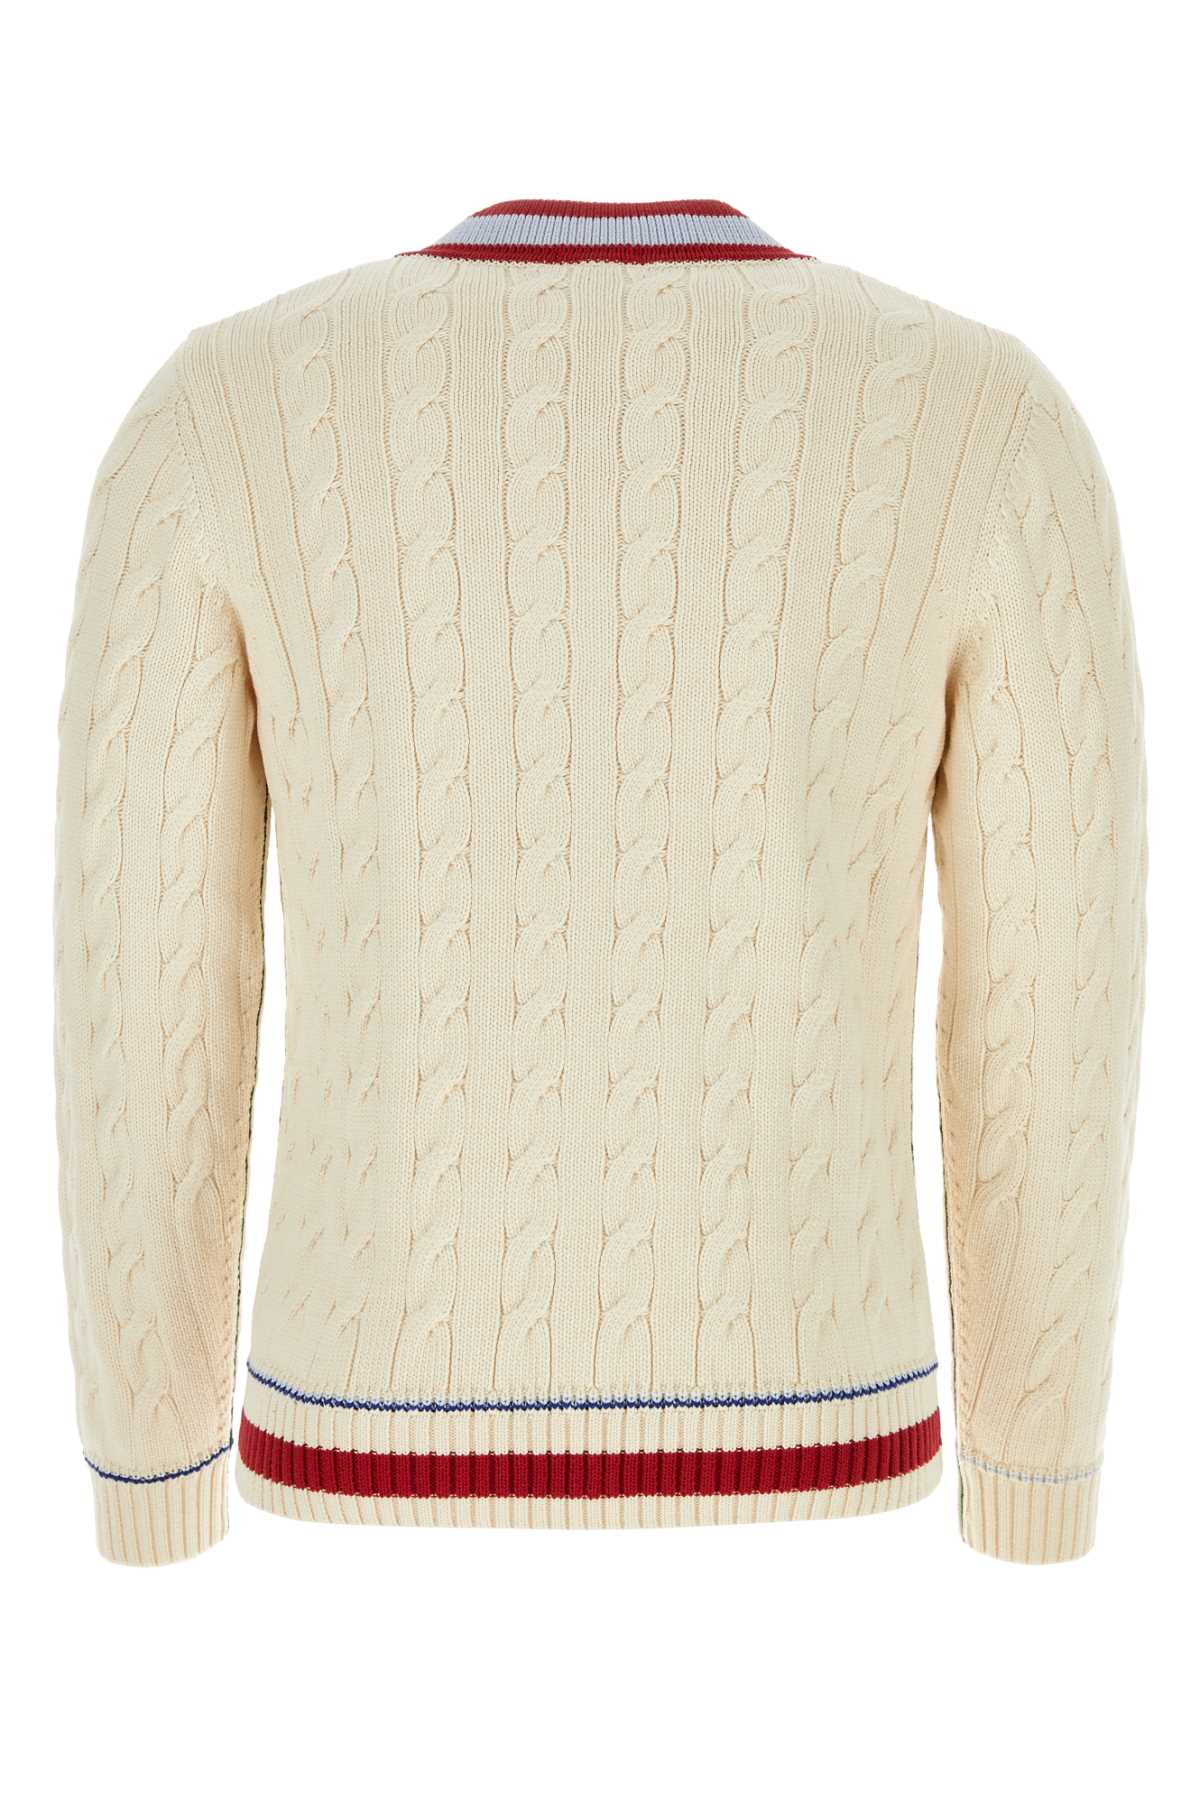 LACOSTE SAND COTTON BLEND SWEATER